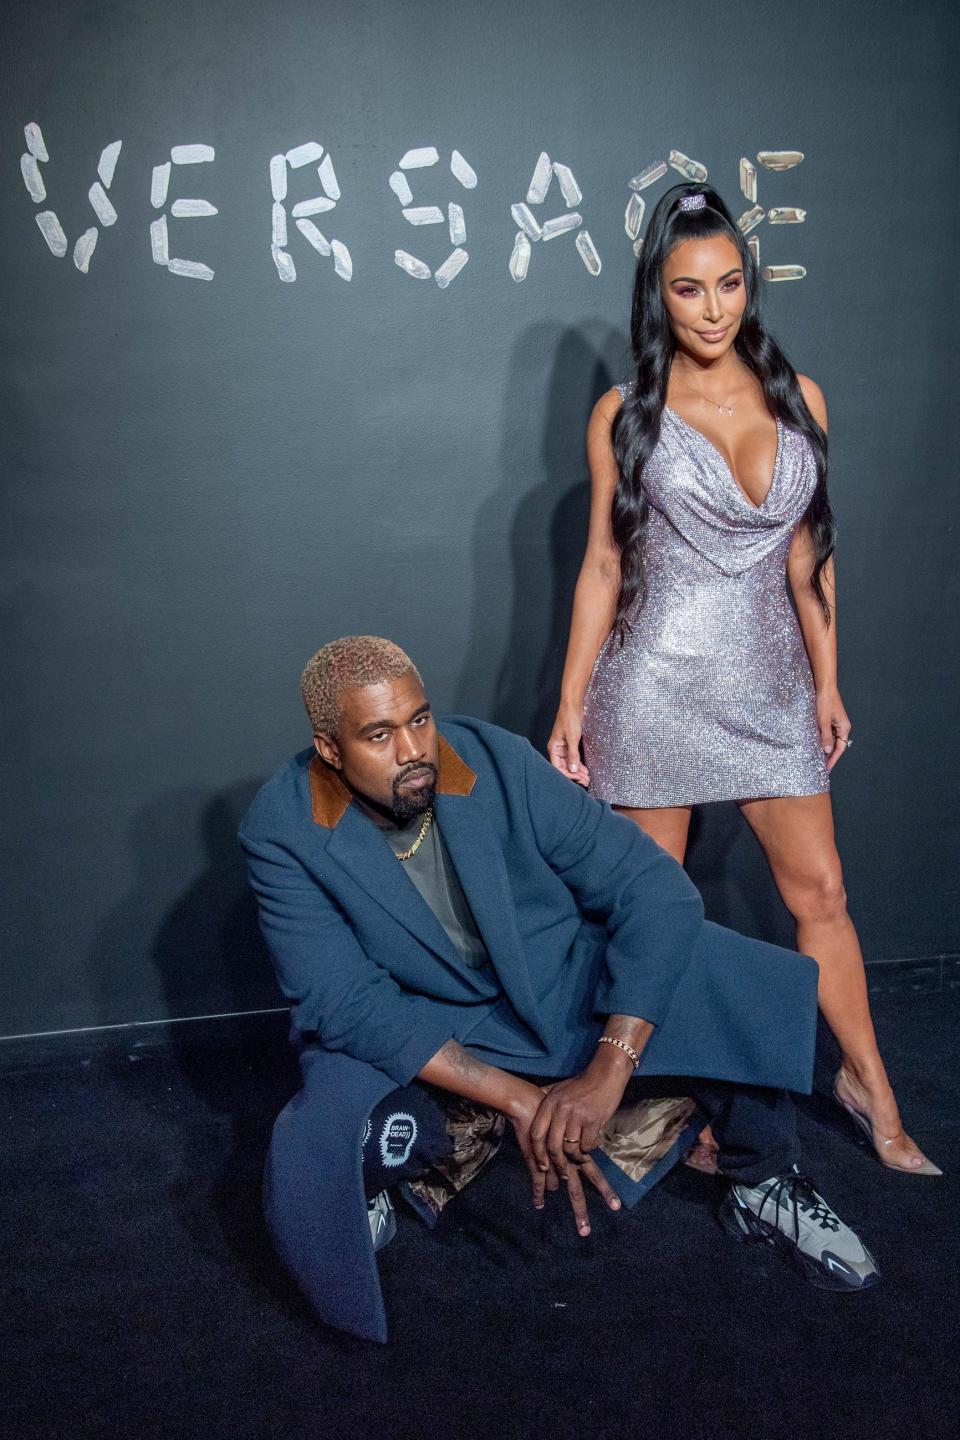 NEW YORK, NEW YORK - DECEMBER 02: Kanye West and Kim Kardashian West attend the the Versace fall 2019 fashion show at the American Stock Exchange Building in lower Manhattan on December 02, 2018 in New York City. (Photo by Roy Rochlin/Getty Images) ORG XMIT: 775265688 ORIG FILE ID: 1076421776